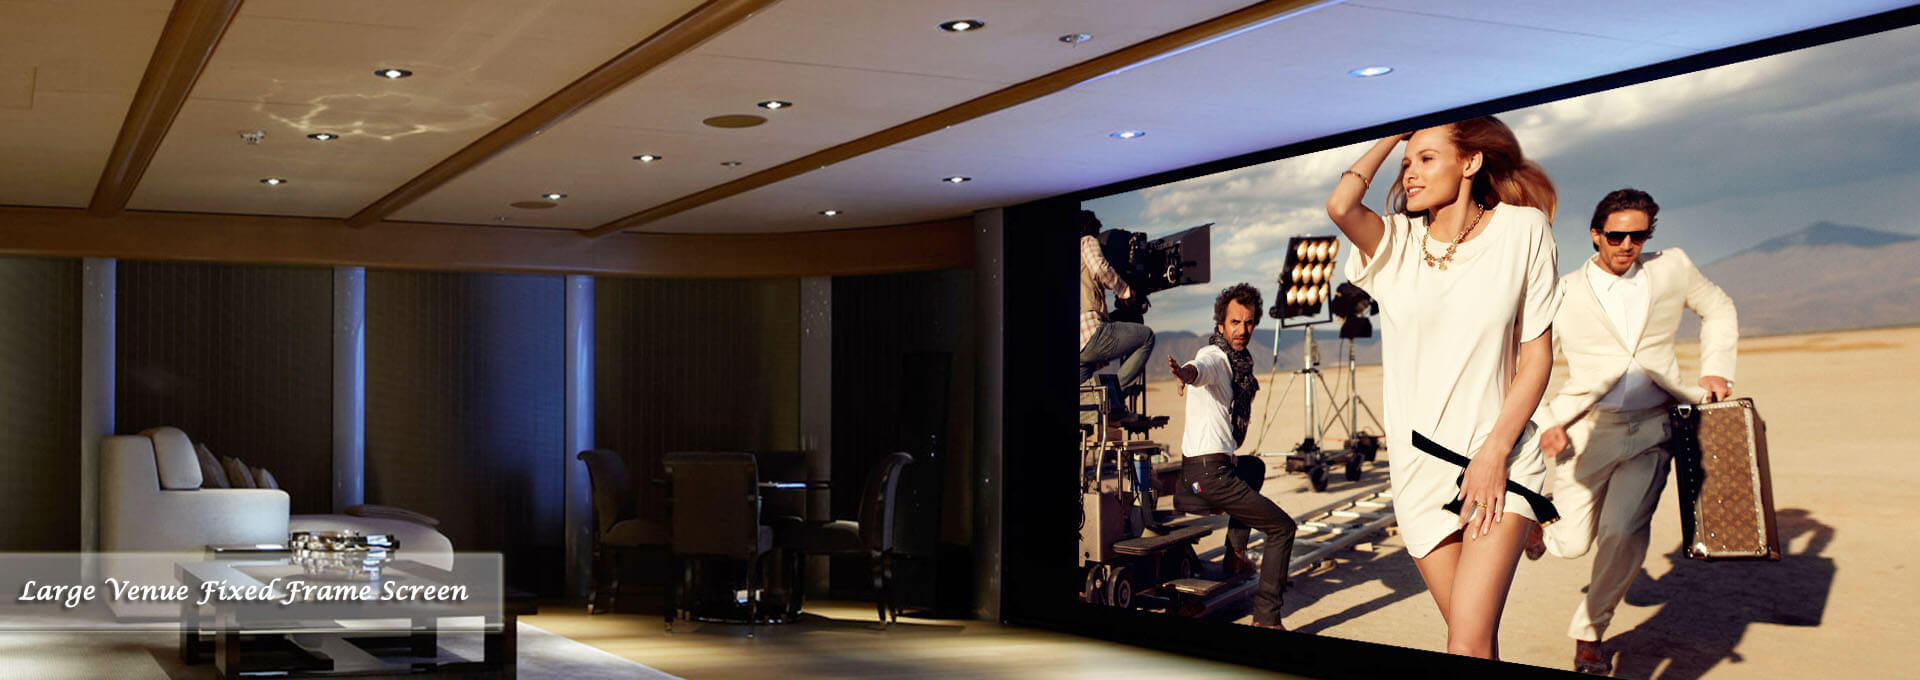 Large Fixed Frame Projector Screen